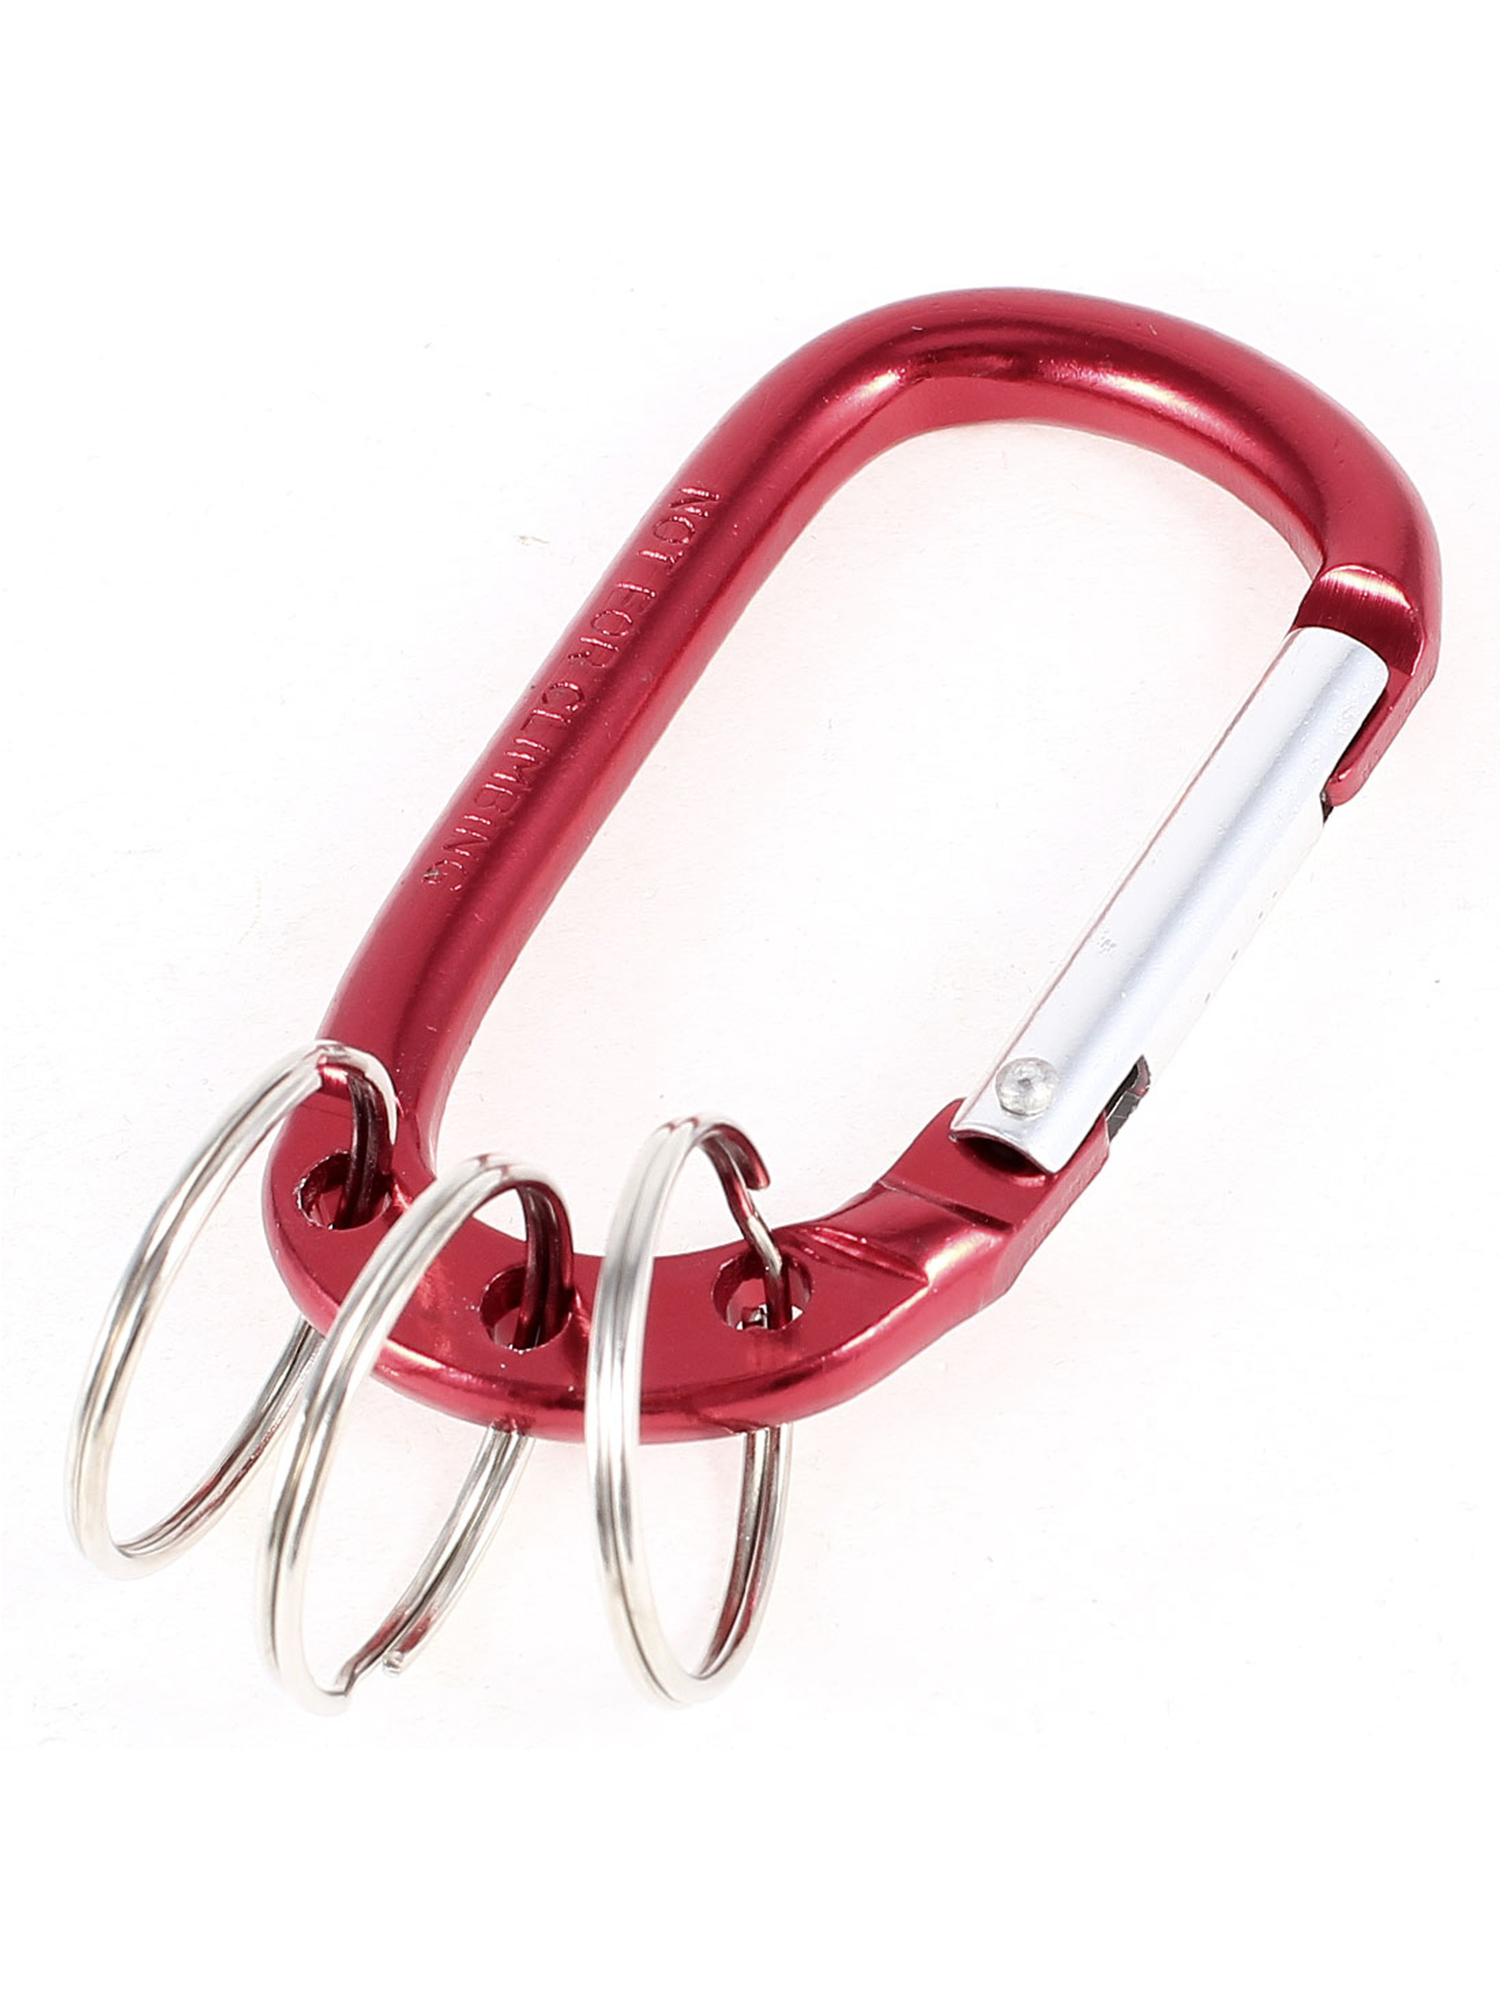 Unique Bargains Aluminum Carabiner Camping Bag Clip Split Burgundy Key Ring Chain, Size: Others, Red